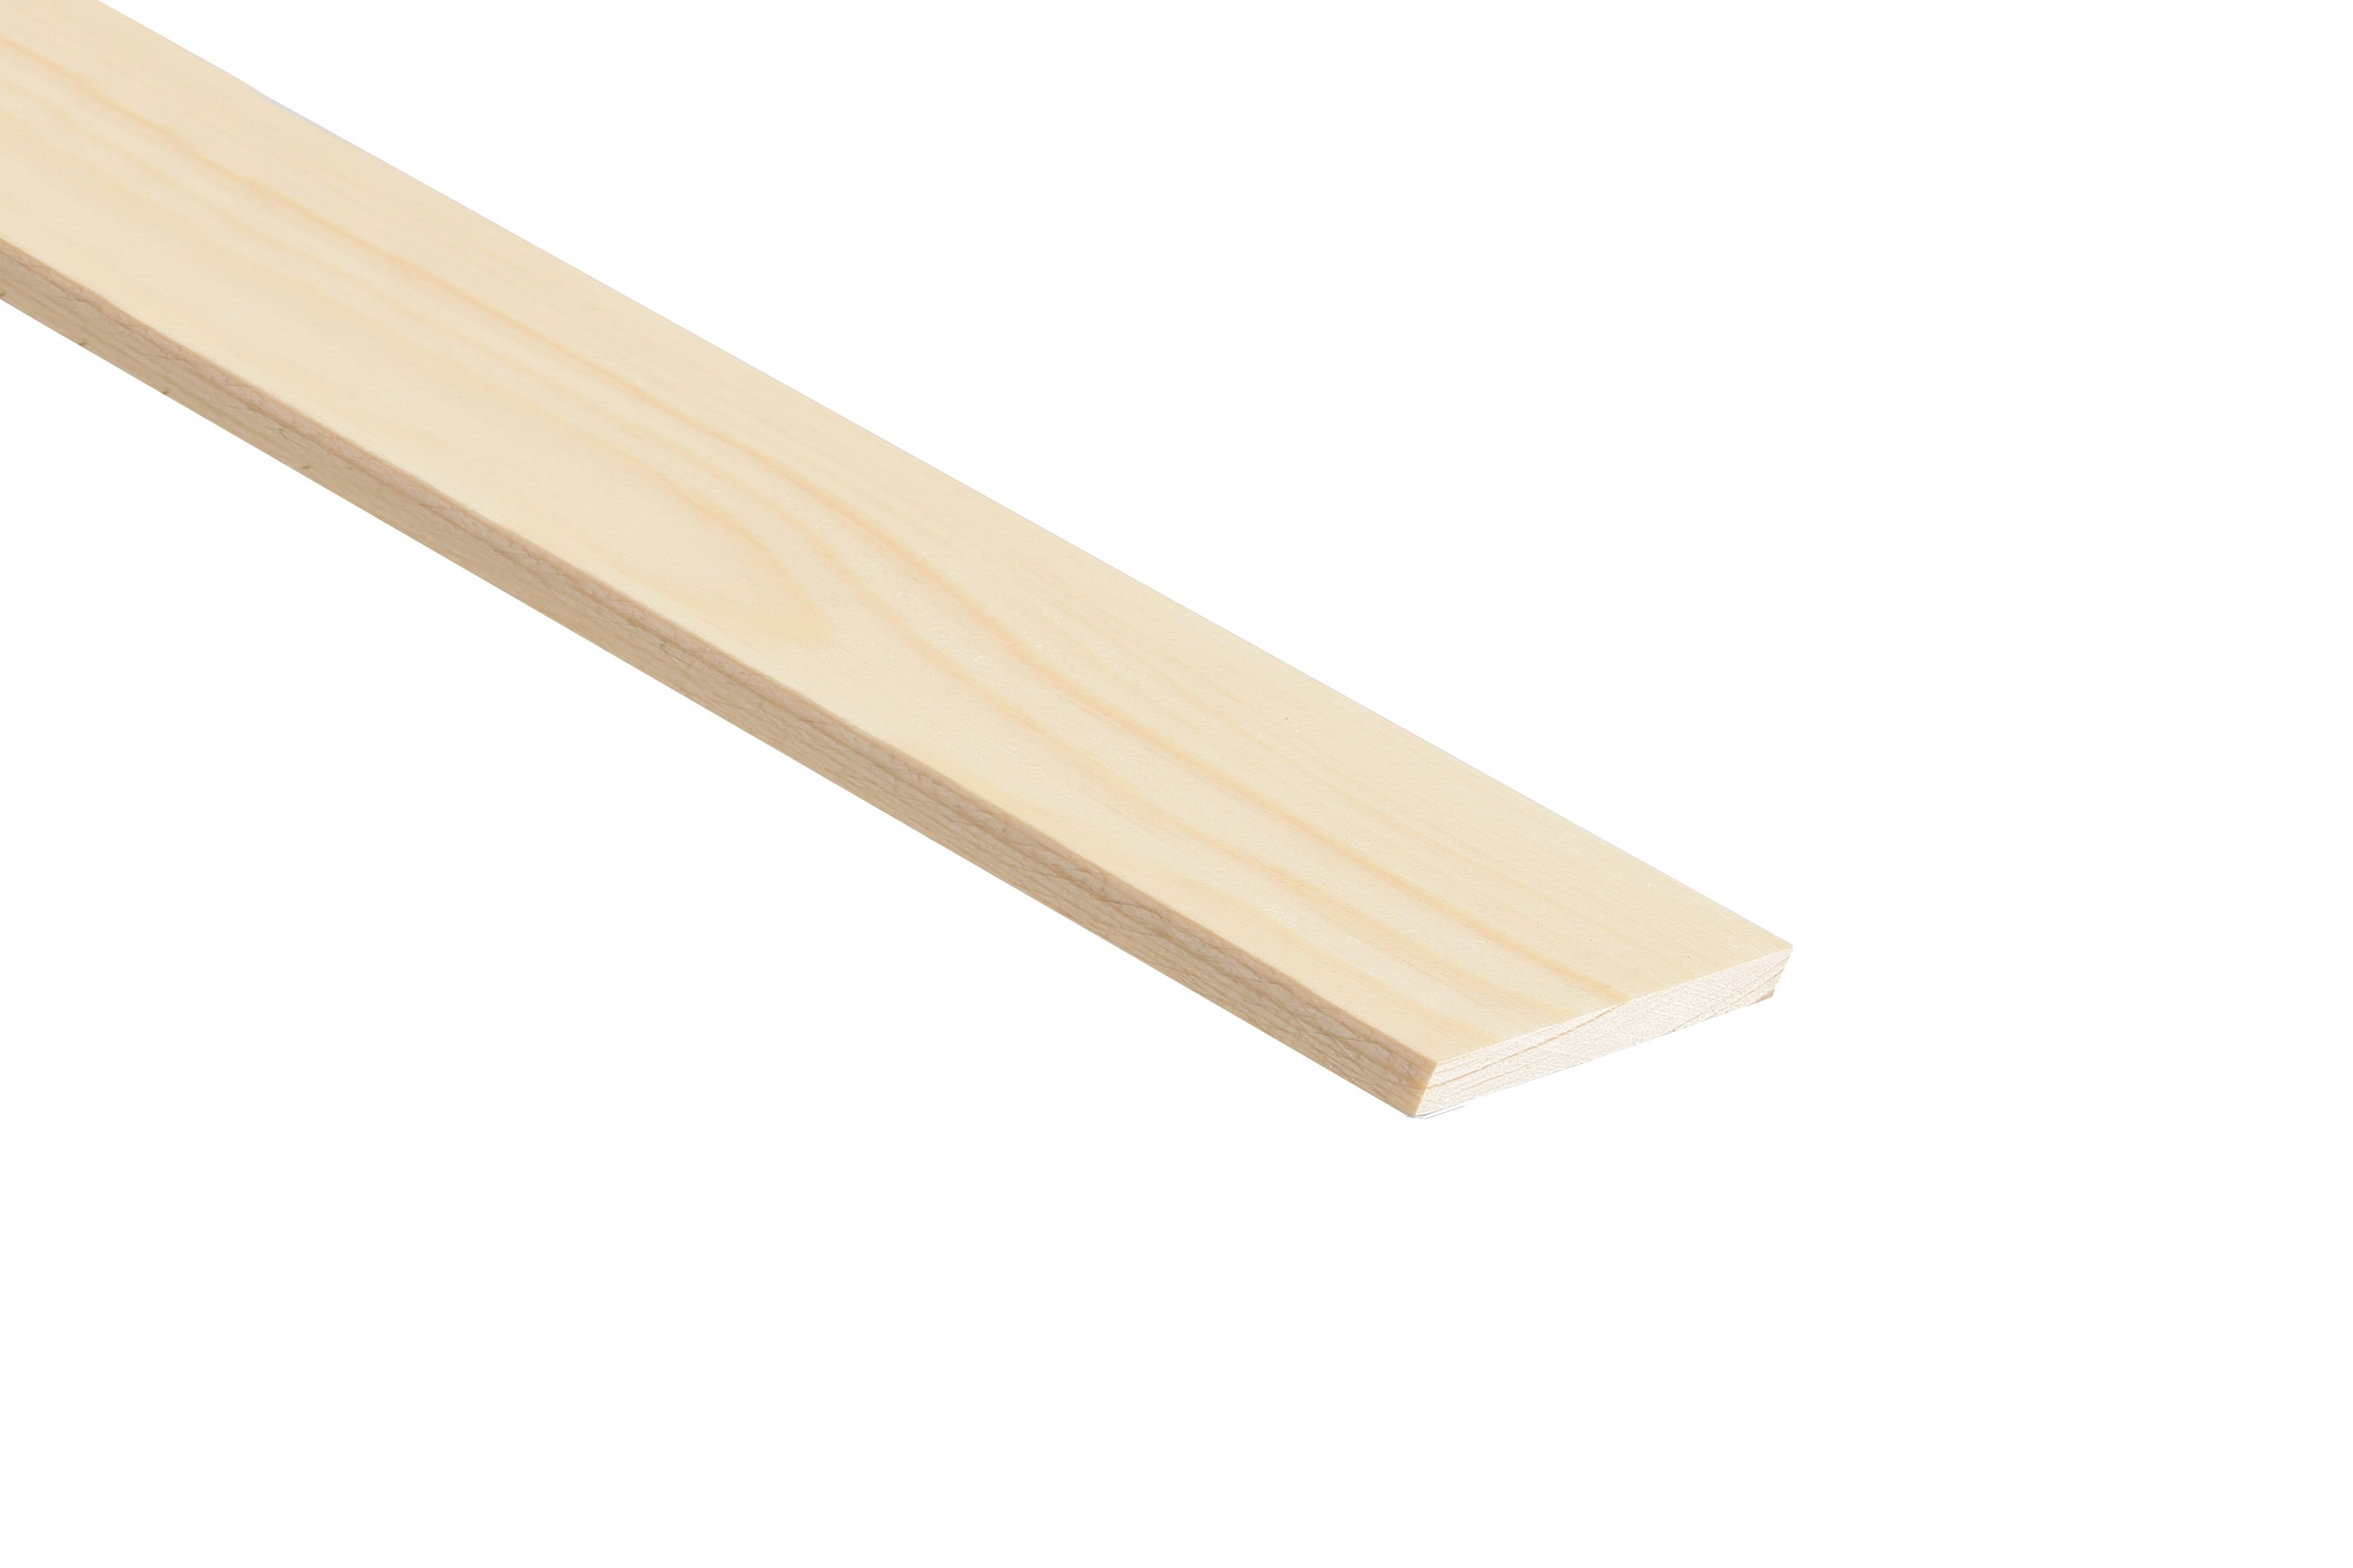 Image of Wickes Pine Stripwood Moulding (PSE) - 6 x 92mm x 2400mm